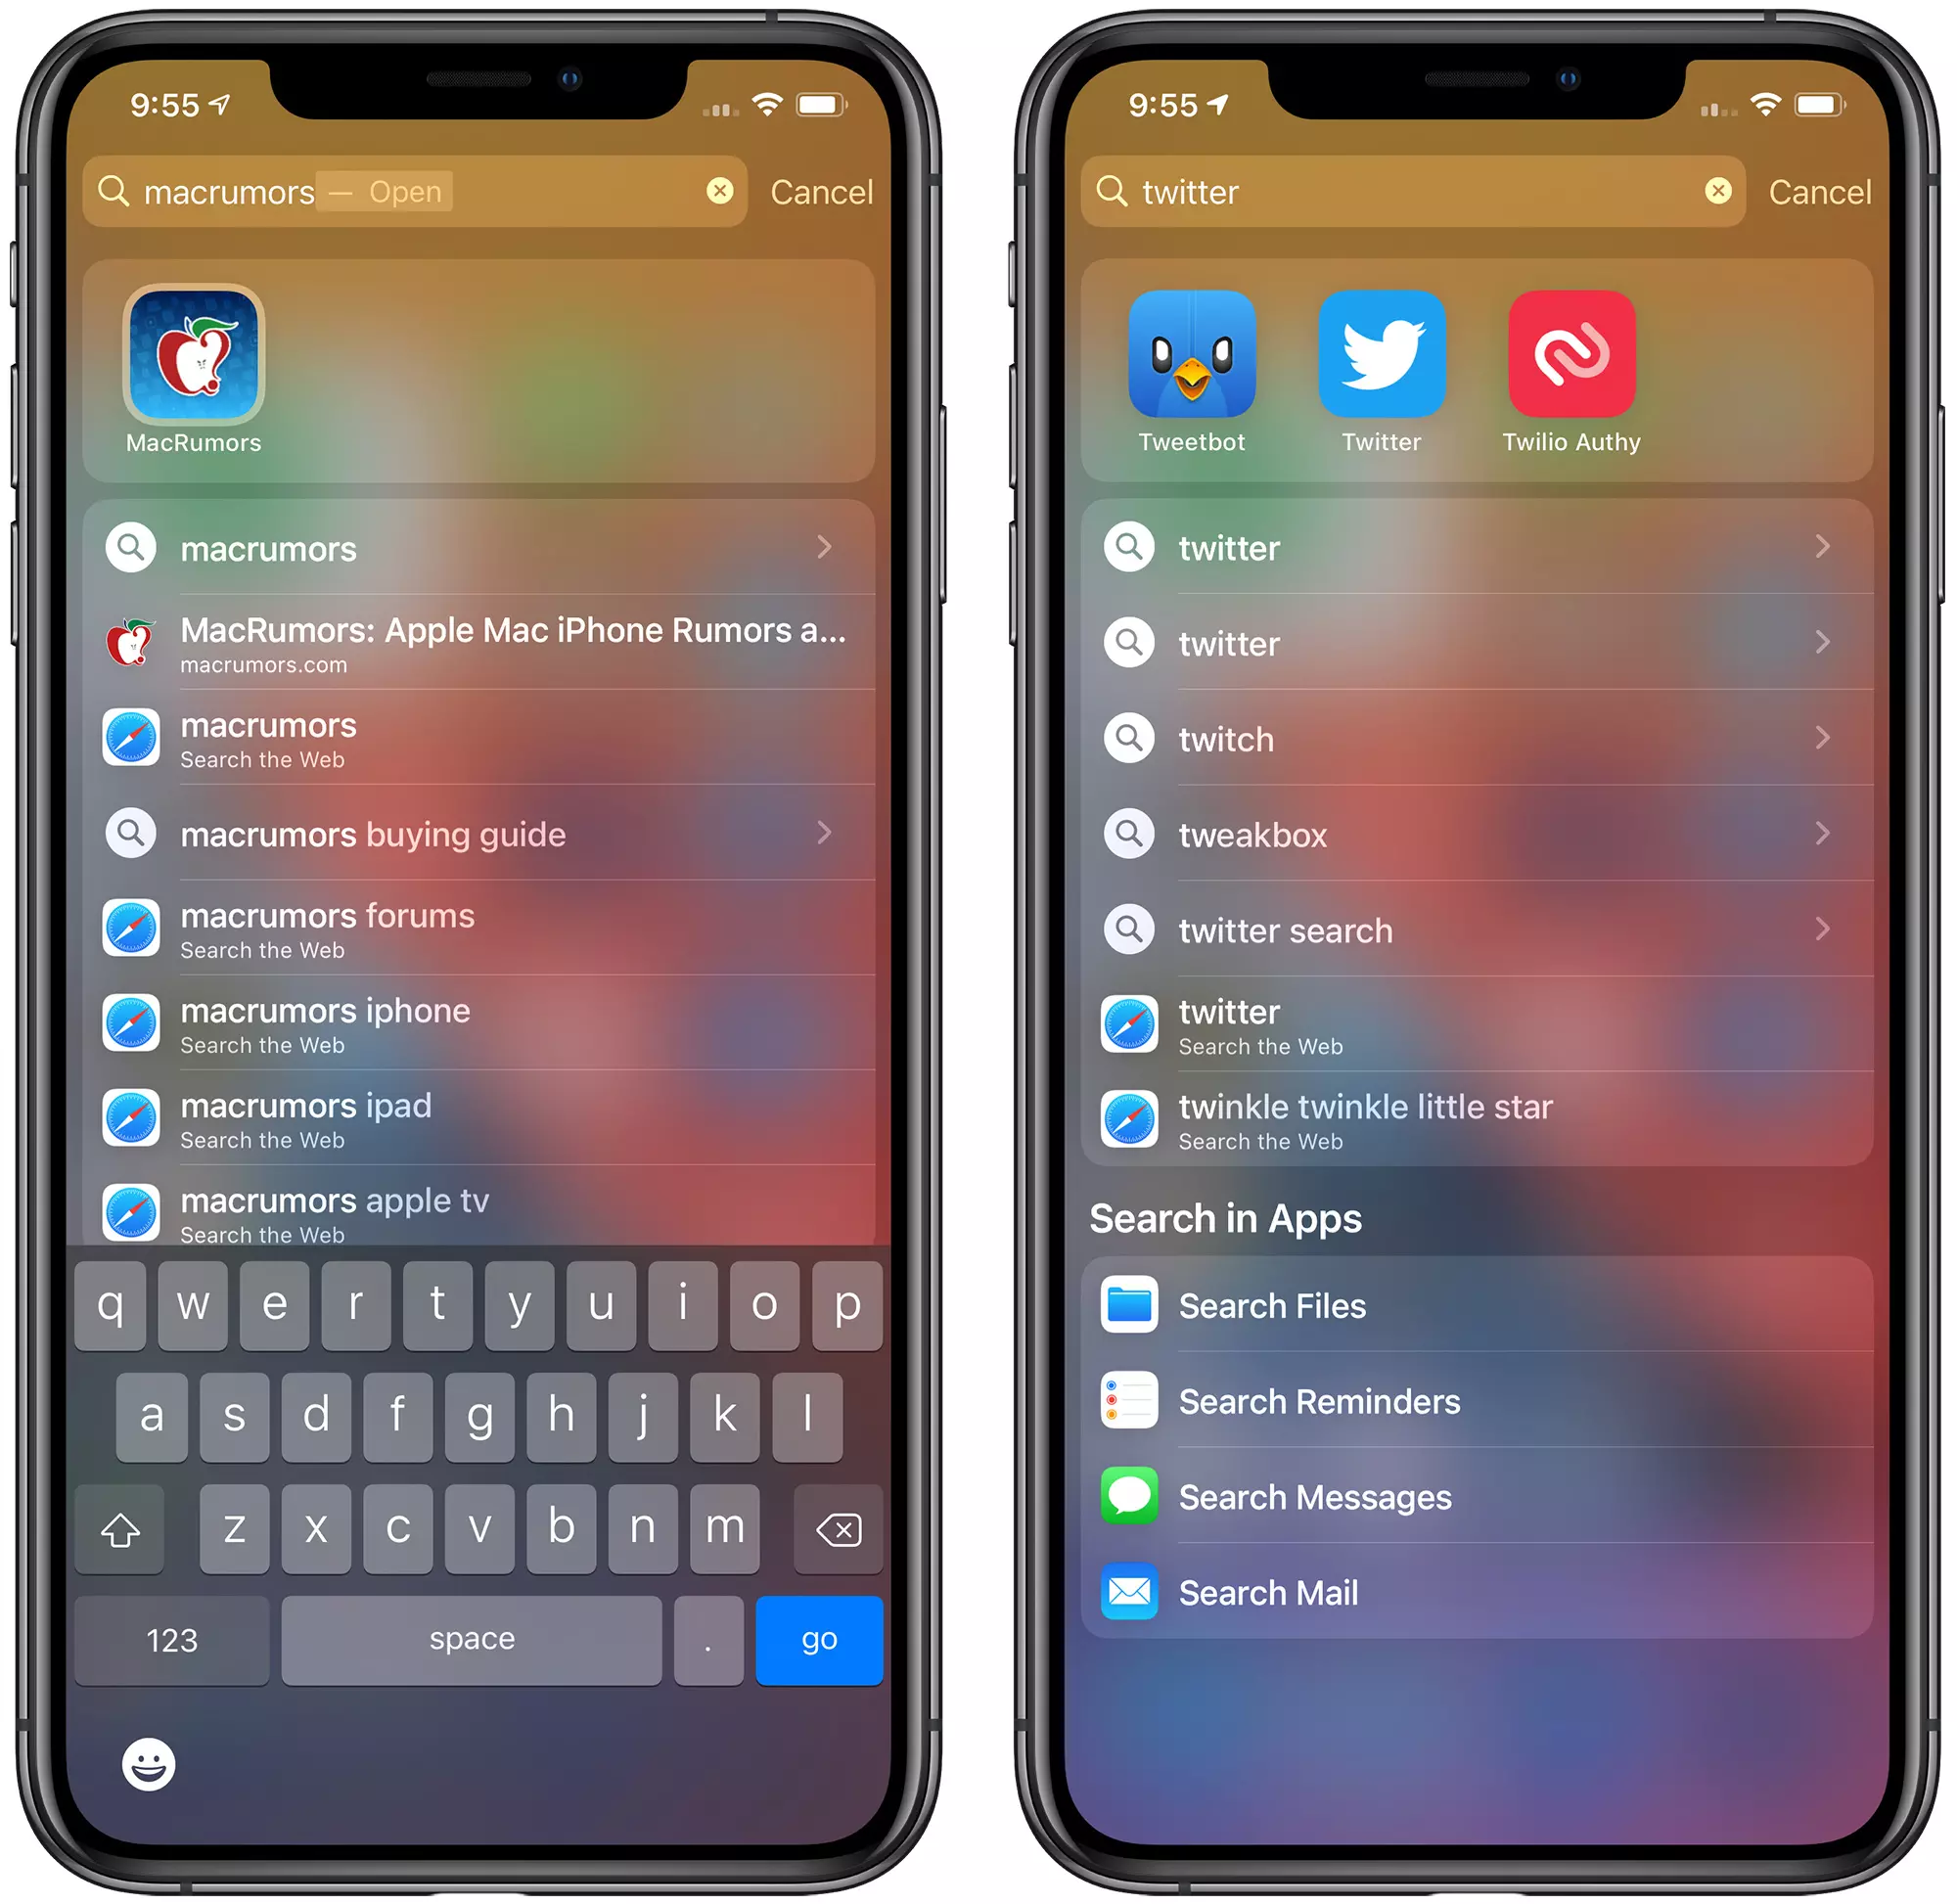 Search in Bar - iOS14 features